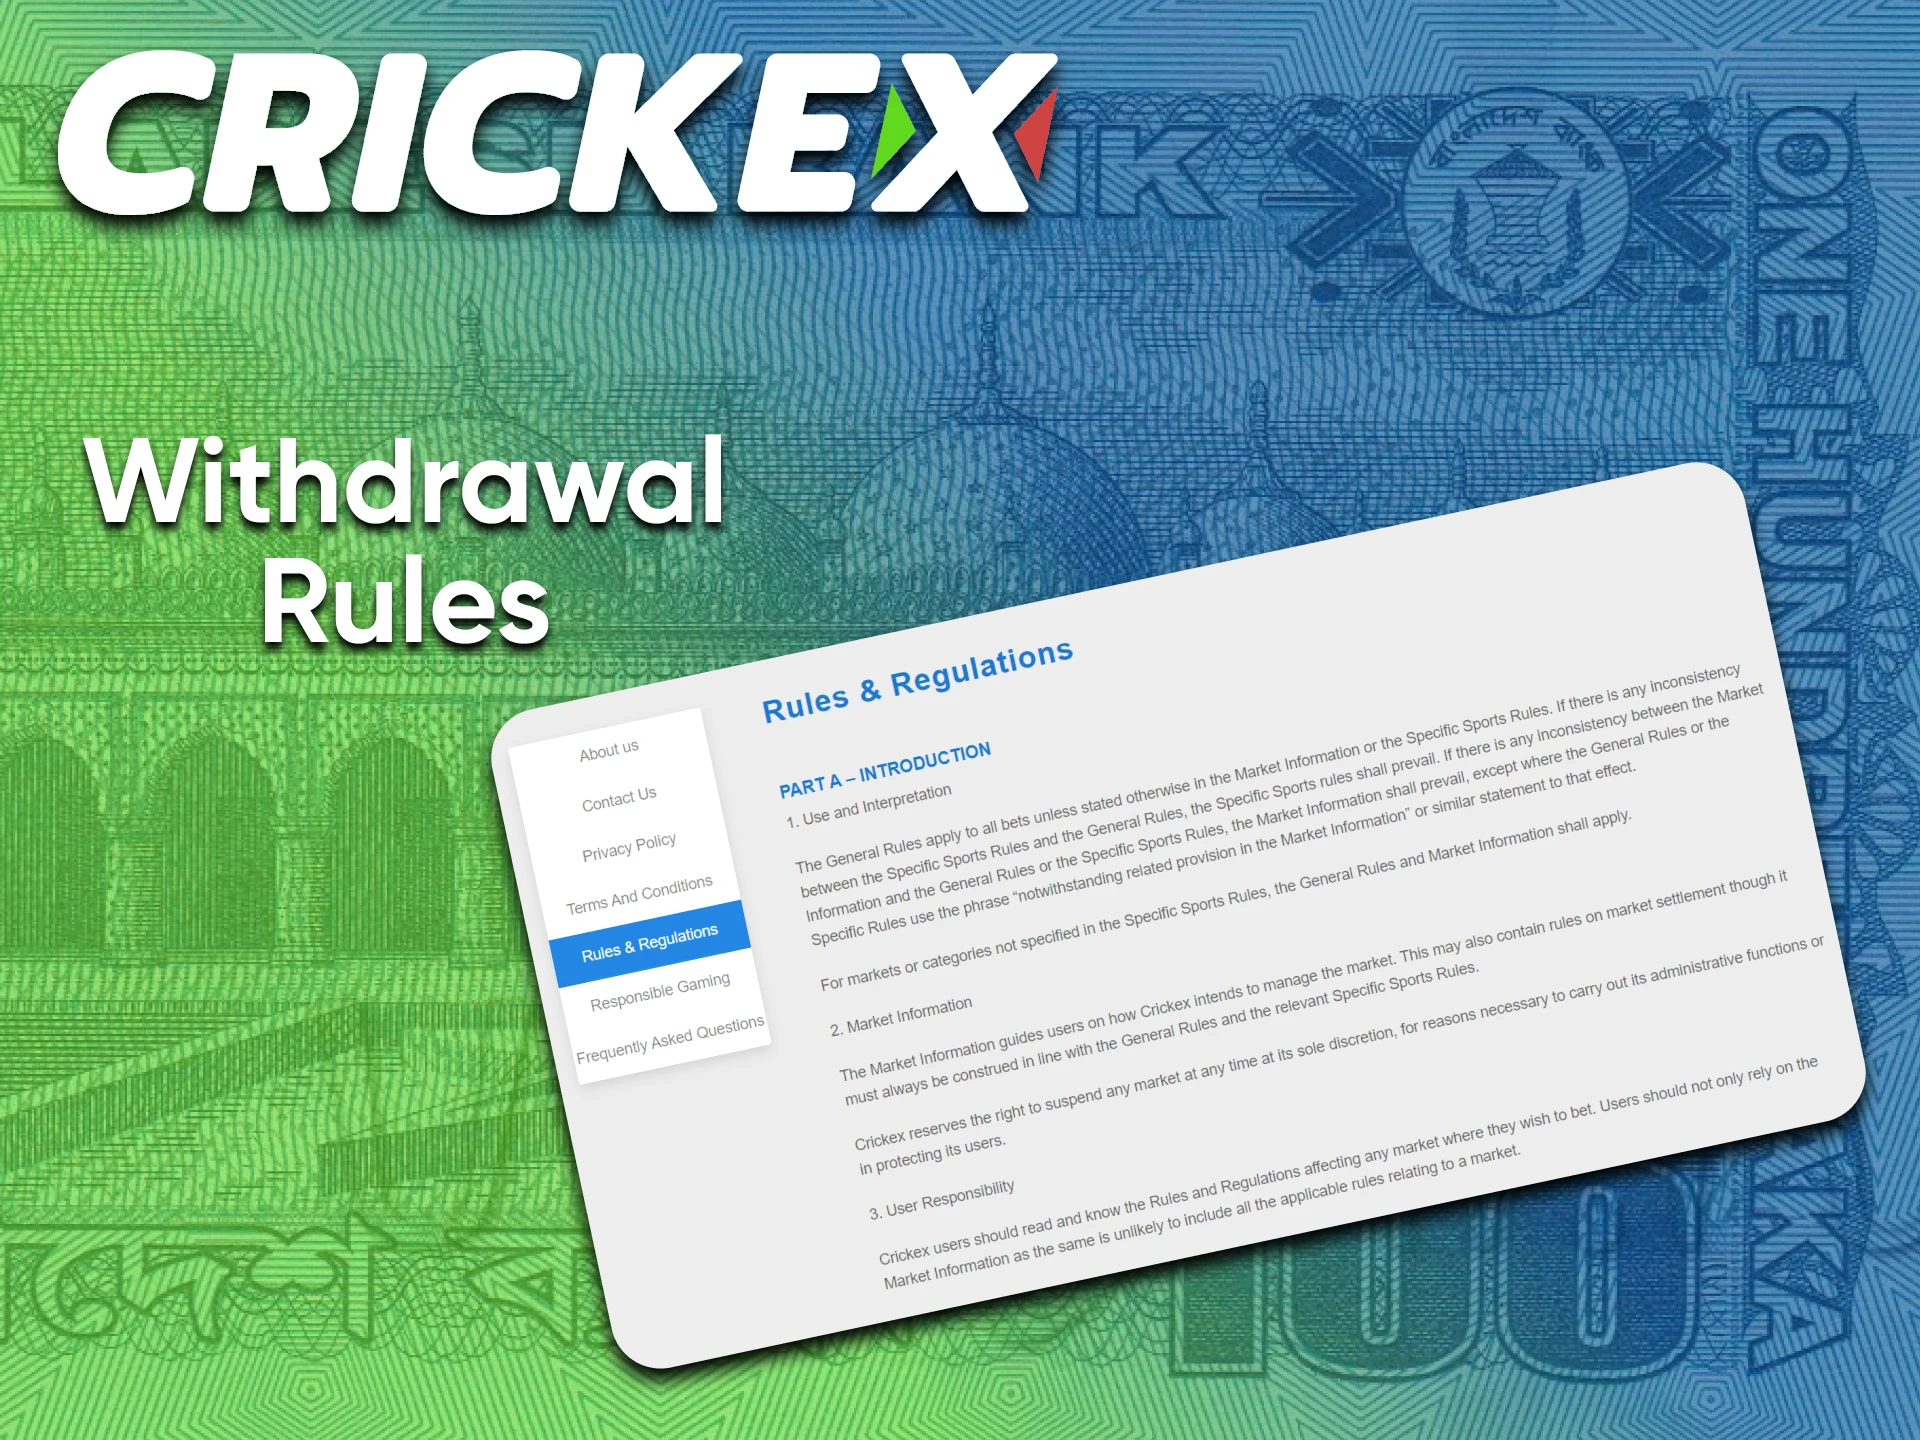 Follow the necessary conditions for withdrawing funds from Crickex.